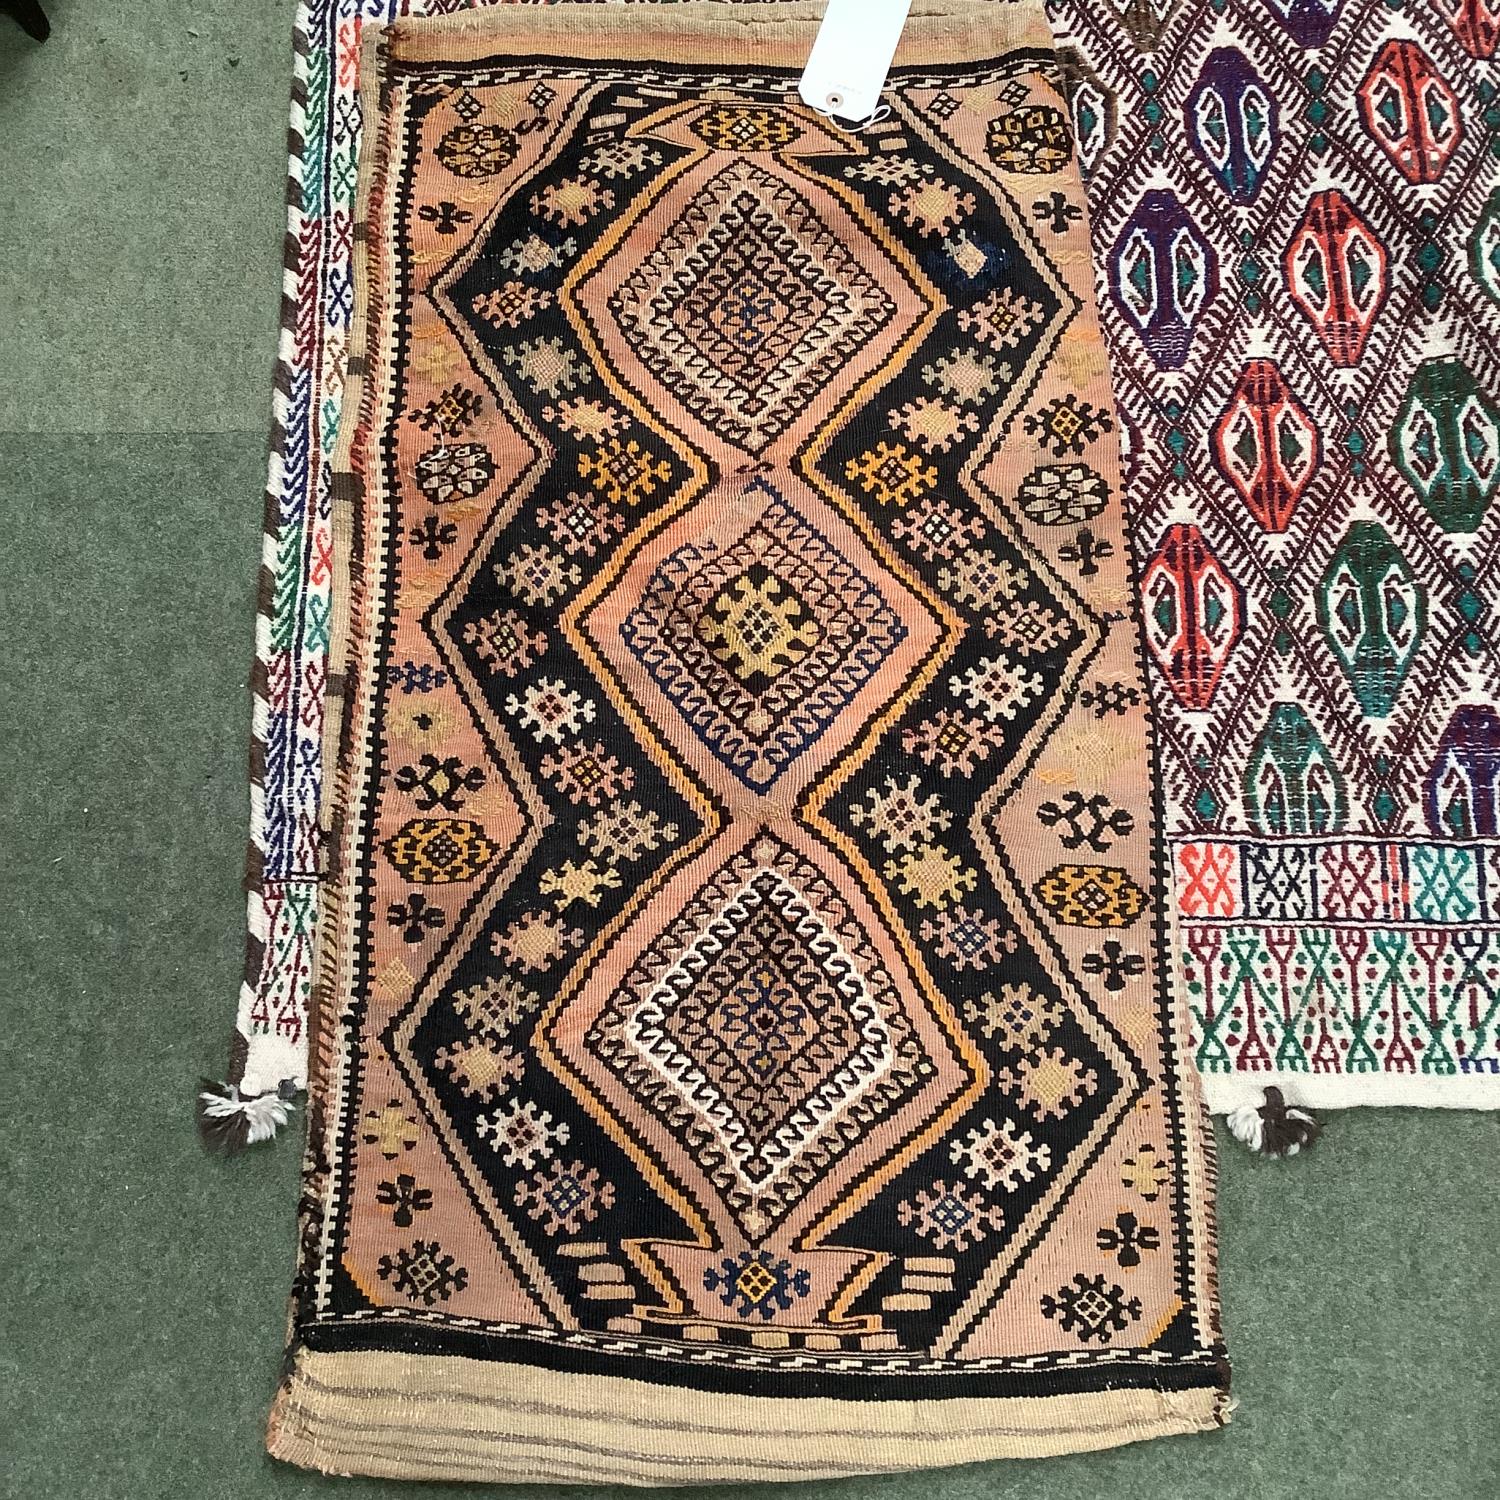 2 rug bags; 133 x 174cm; 59 x 104cm; All being sold on behalf of Charity; see images for details - Image 2 of 6